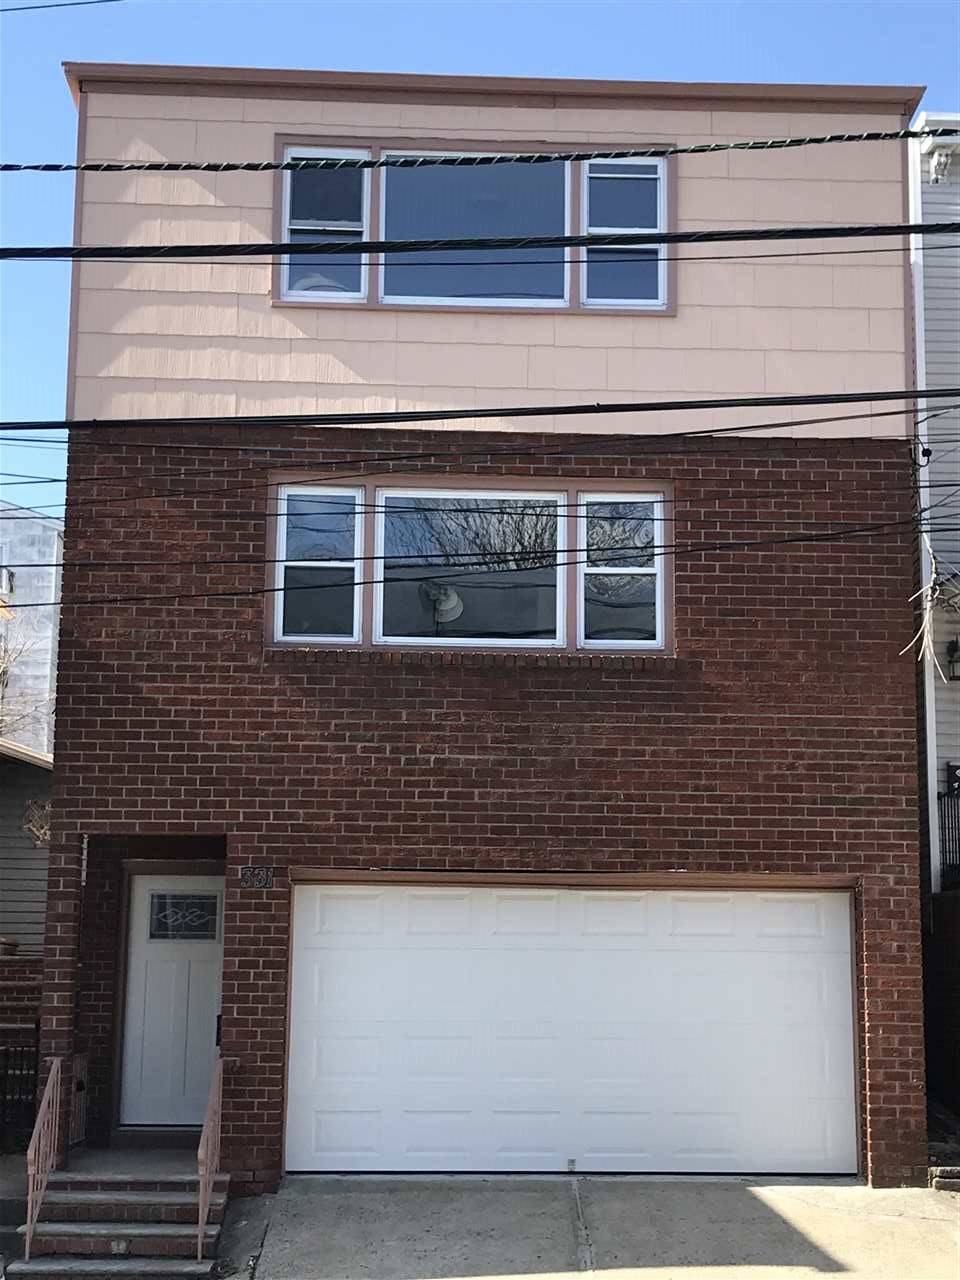 Bring your investors for this newly renovated legal 3 family in Guttenberg